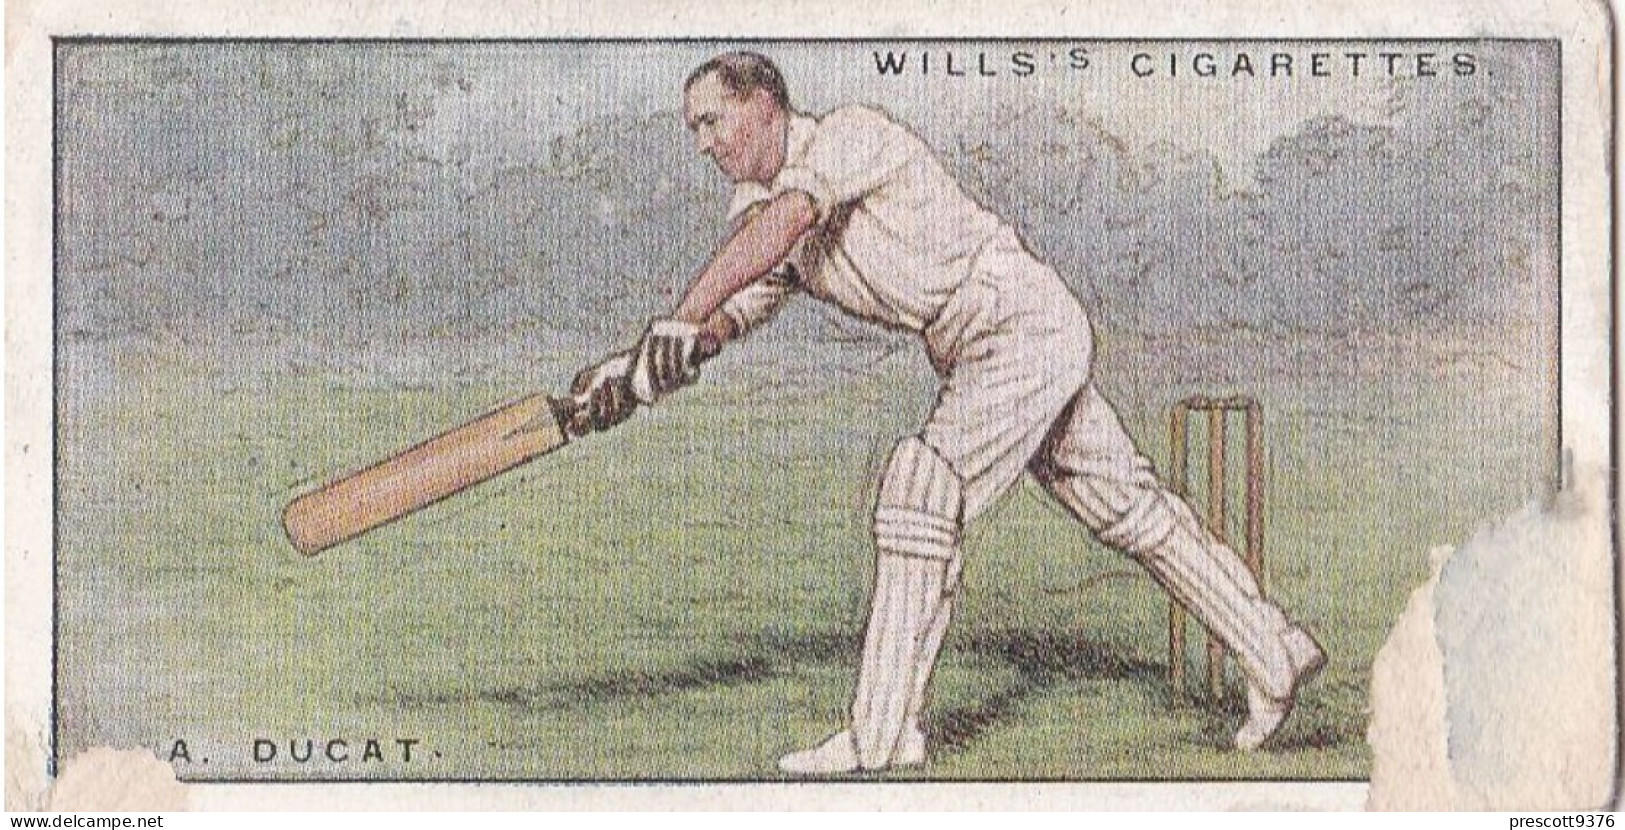 13 Andrew Ducatt, Surrey - Cricketers 1930 - Players Cigarette Card - Original  Card - Player's